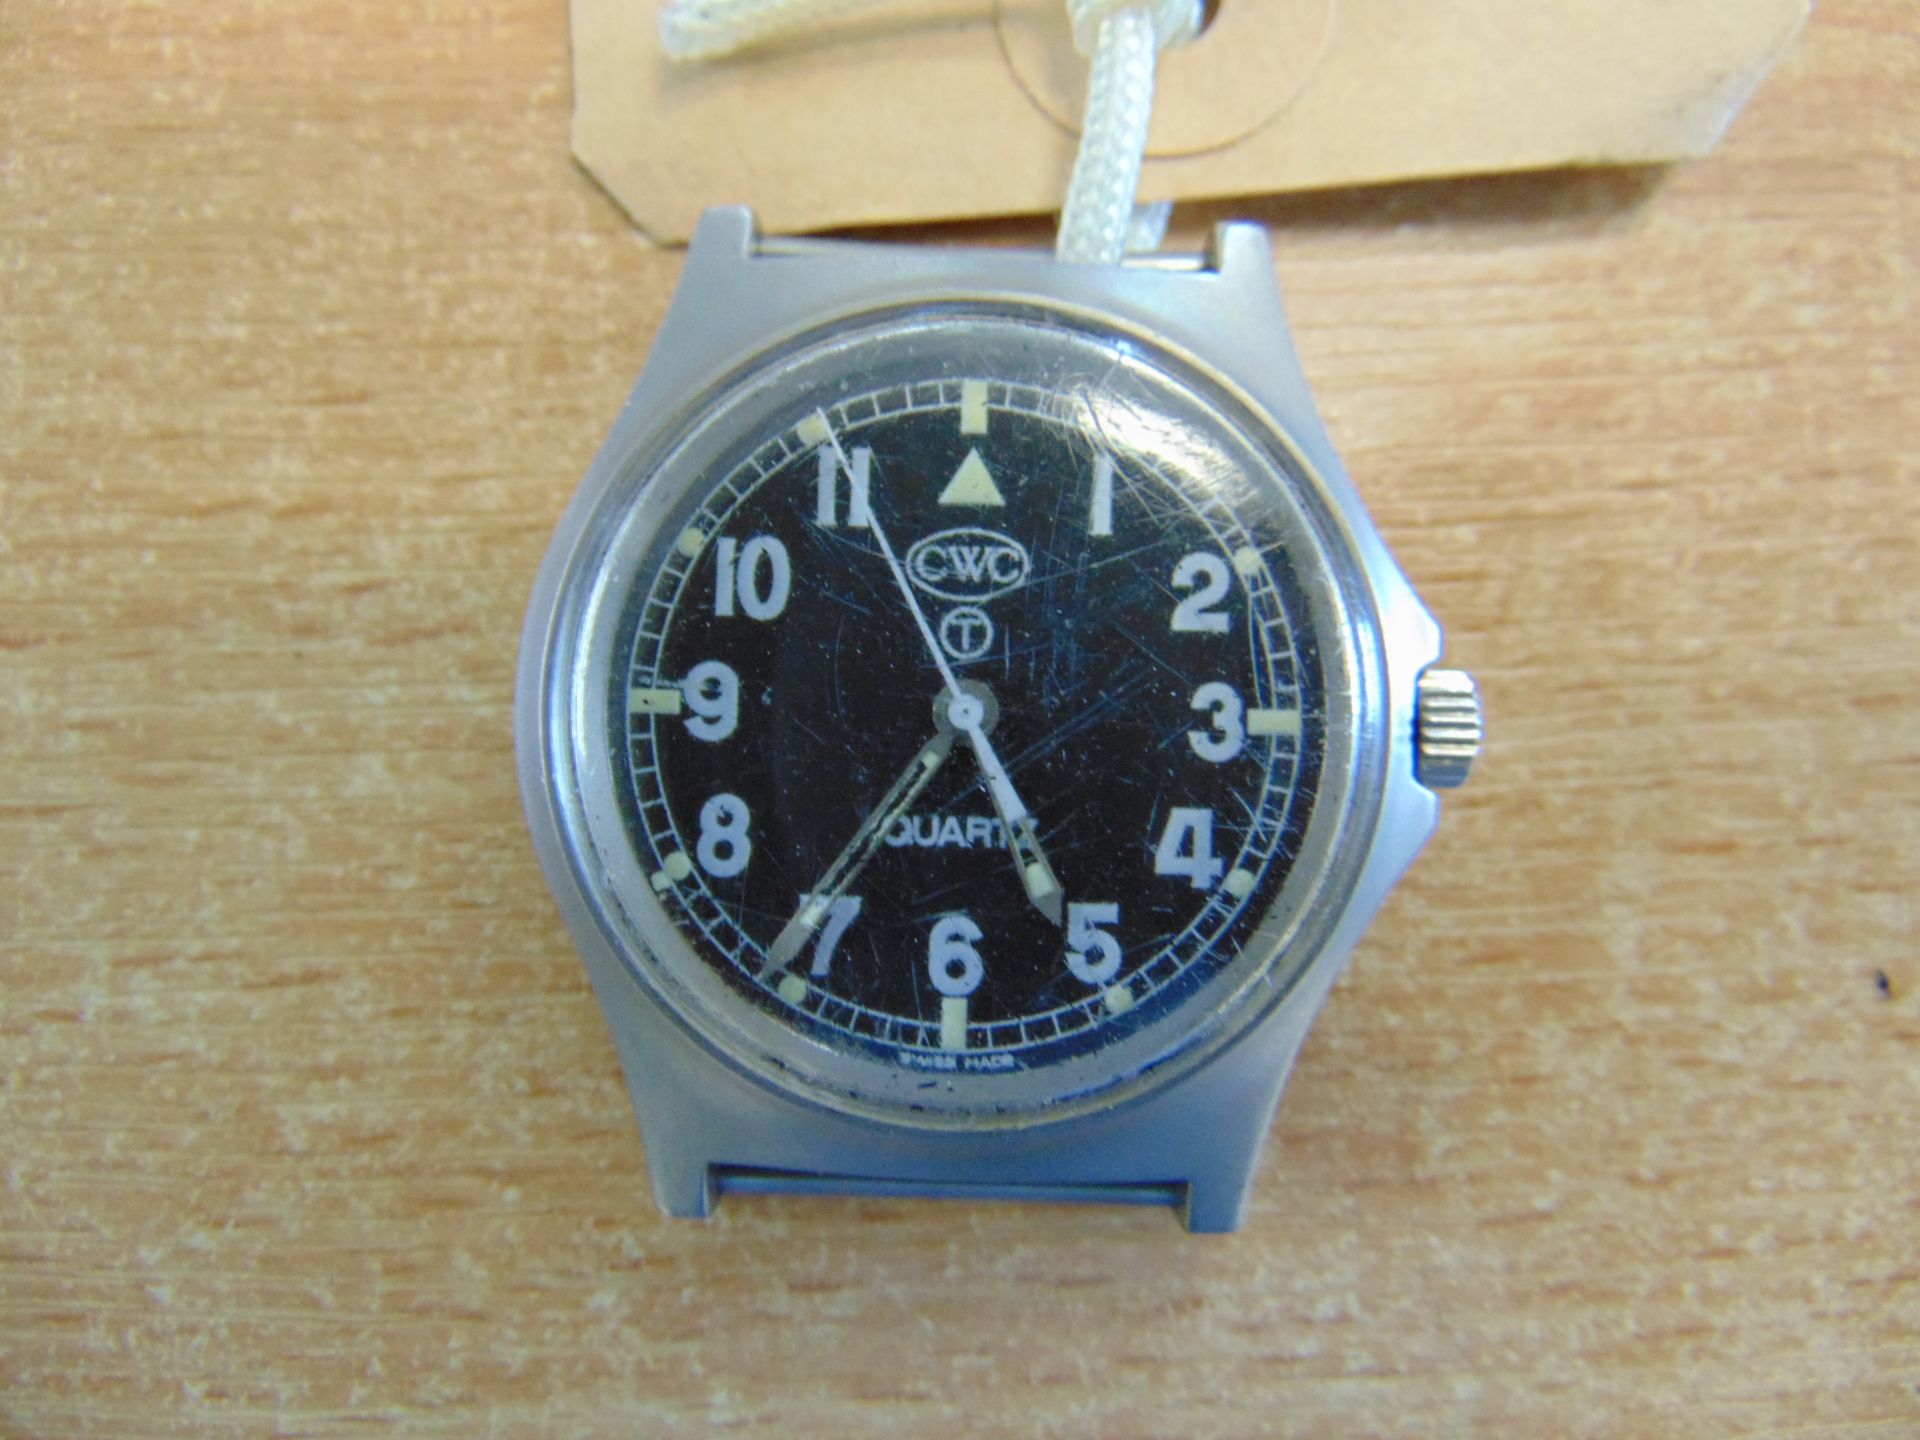 CWC W10 British Army Service Watch Water Resistant to 5 ATM, Nato Markings, Date 2004 - Image 2 of 4